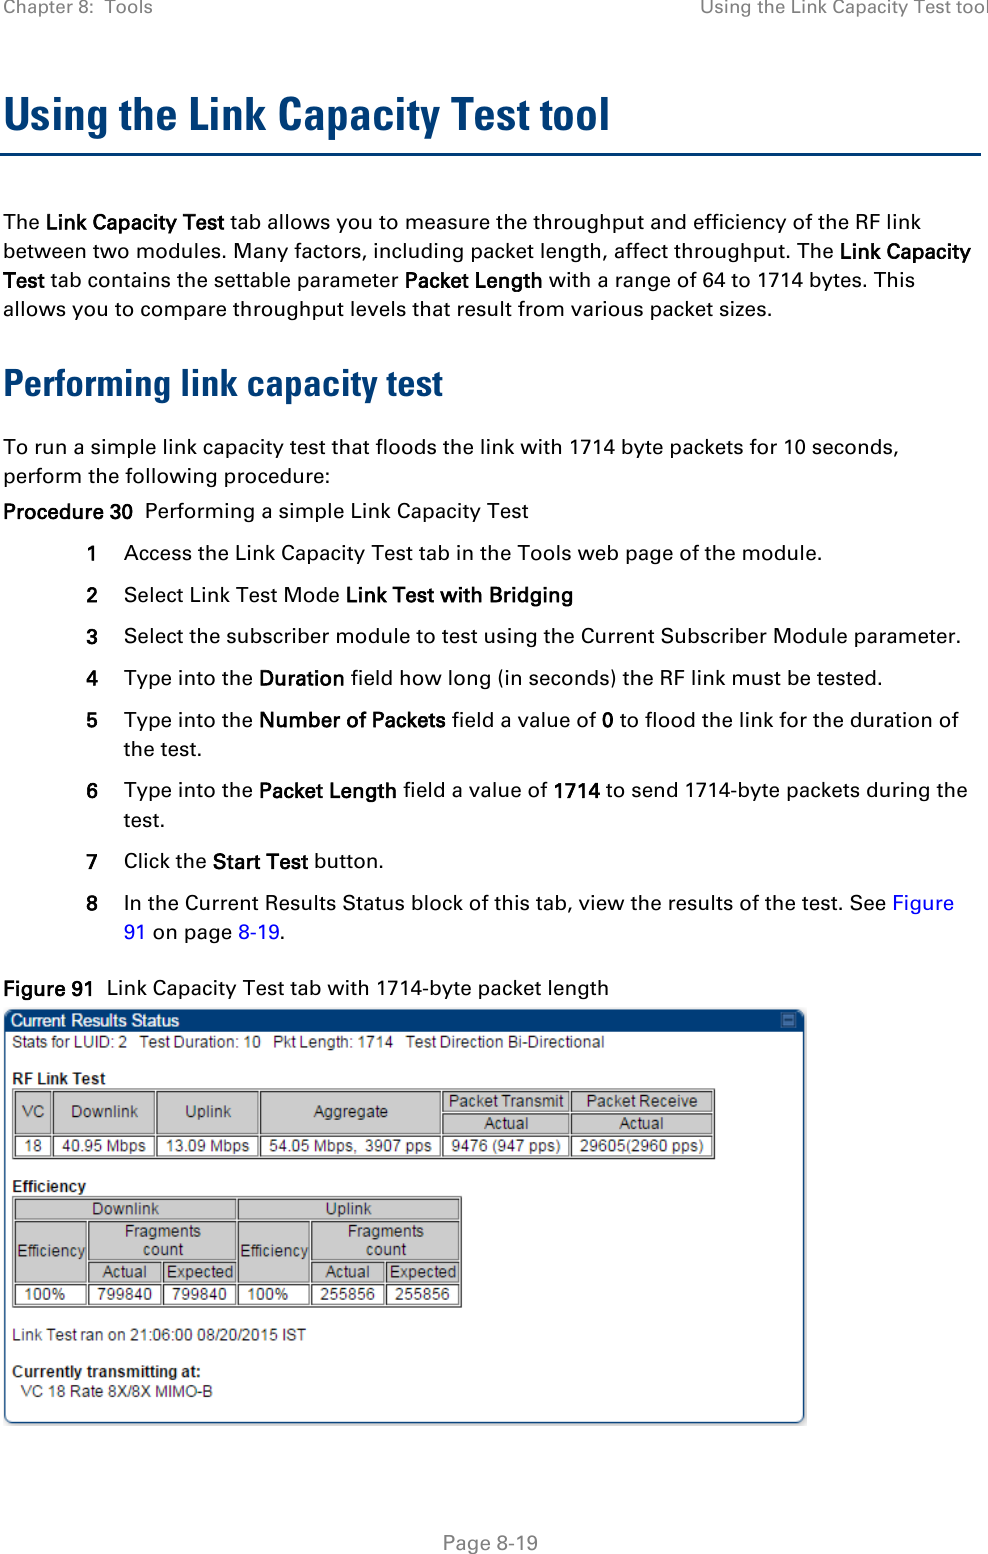 Chapter 8:  Tools Using the Link Capacity Test tool   Page 8-19 Using the Link Capacity Test tool The Link Capacity Test tab allows you to measure the throughput and efficiency of the RF link between two modules. Many factors, including packet length, affect throughput. The Link Capacity Test tab contains the settable parameter Packet Length with a range of 64 to 1714 bytes. This allows you to compare throughput levels that result from various packet sizes. Performing link capacity test To run a simple link capacity test that floods the link with 1714 byte packets for 10 seconds, perform the following procedure: Procedure 30  Performing a simple Link Capacity Test 1 Access the Link Capacity Test tab in the Tools web page of the module. 2 Select Link Test Mode Link Test with Bridging 3 Select the subscriber module to test using the Current Subscriber Module parameter. 4 Type into the Duration field how long (in seconds) the RF link must be tested. 5 Type into the Number of Packets field a value of 0 to flood the link for the duration of the test. 6 Type into the Packet Length field a value of 1714 to send 1714-byte packets during the test. 7 Click the Start Test button. 8 In the Current Results Status block of this tab, view the results of the test. See Figure 91 on page 8-19. Figure 91  Link Capacity Test tab with 1714-byte packet length  